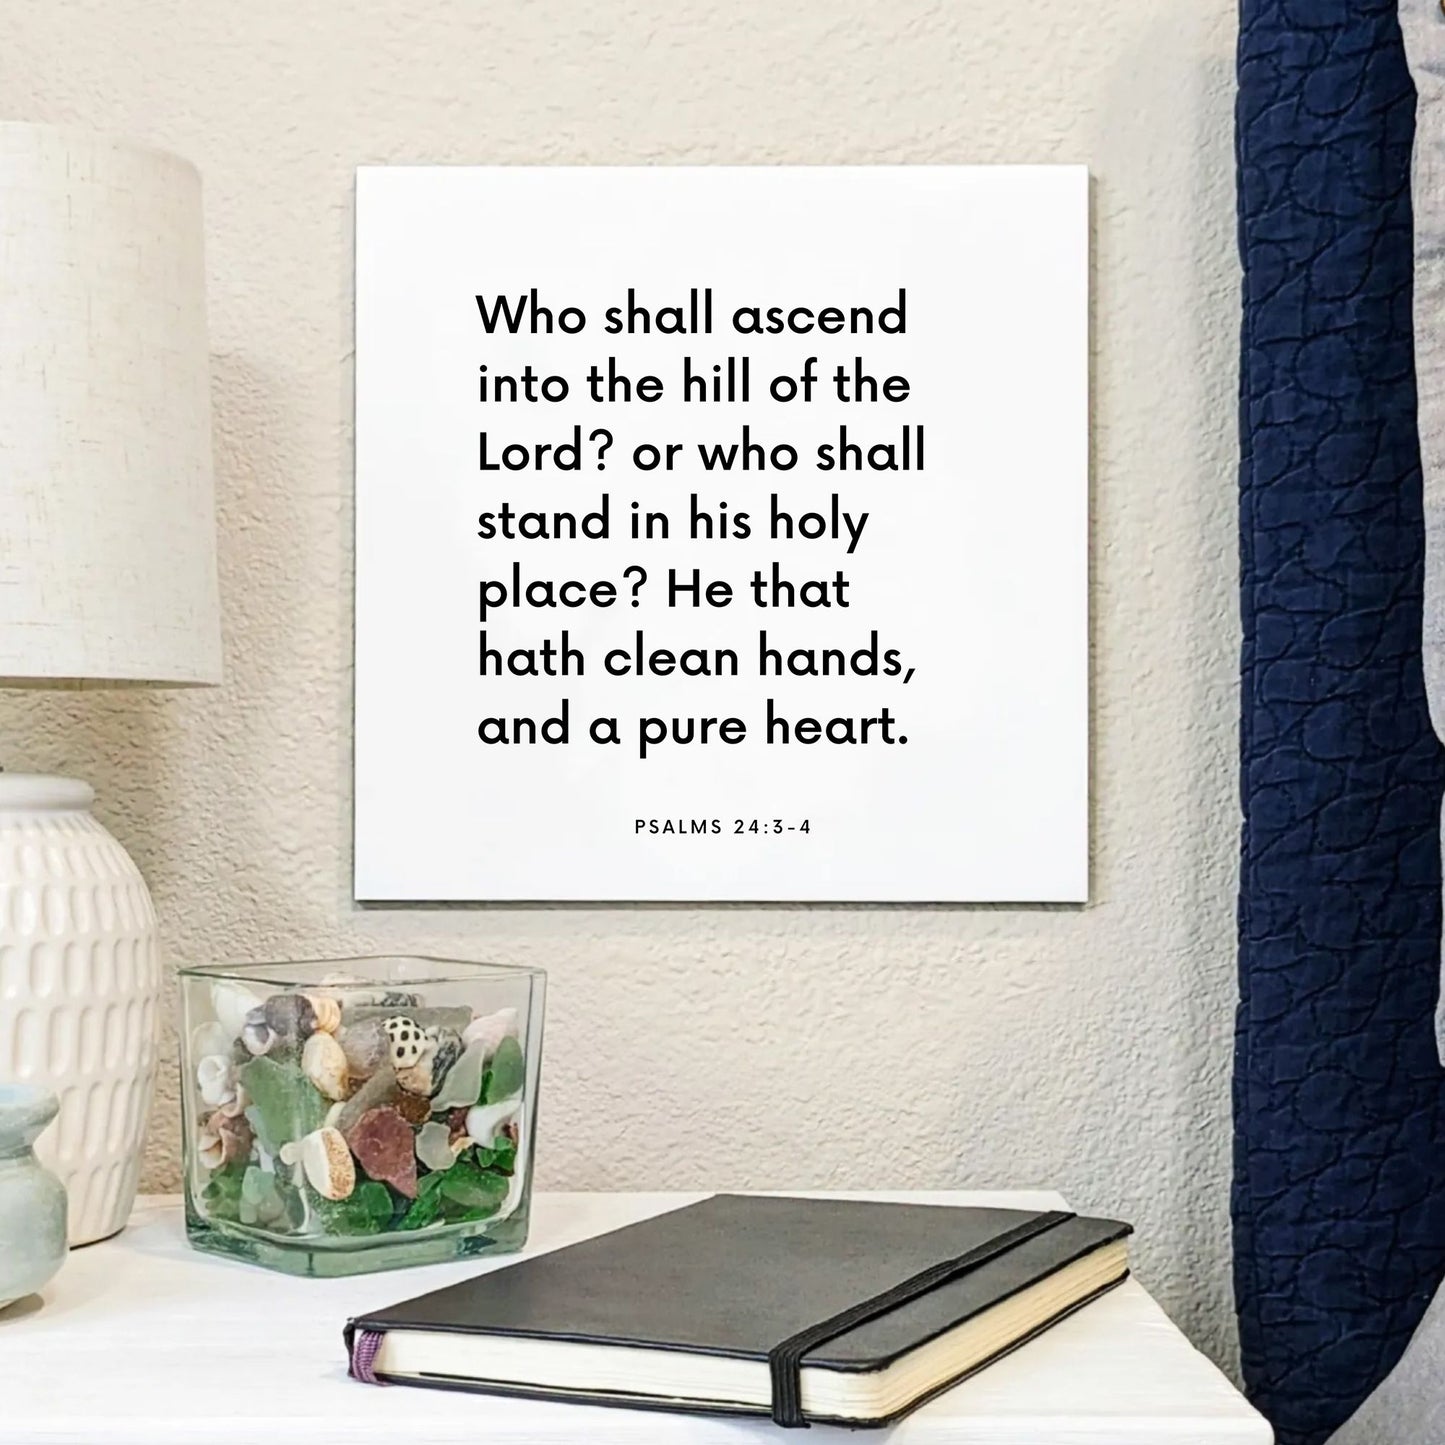 Bedside mouting of the scripture tile for Psalms 24:3-4 - "Who shall ascend into the hill of the Lord?"